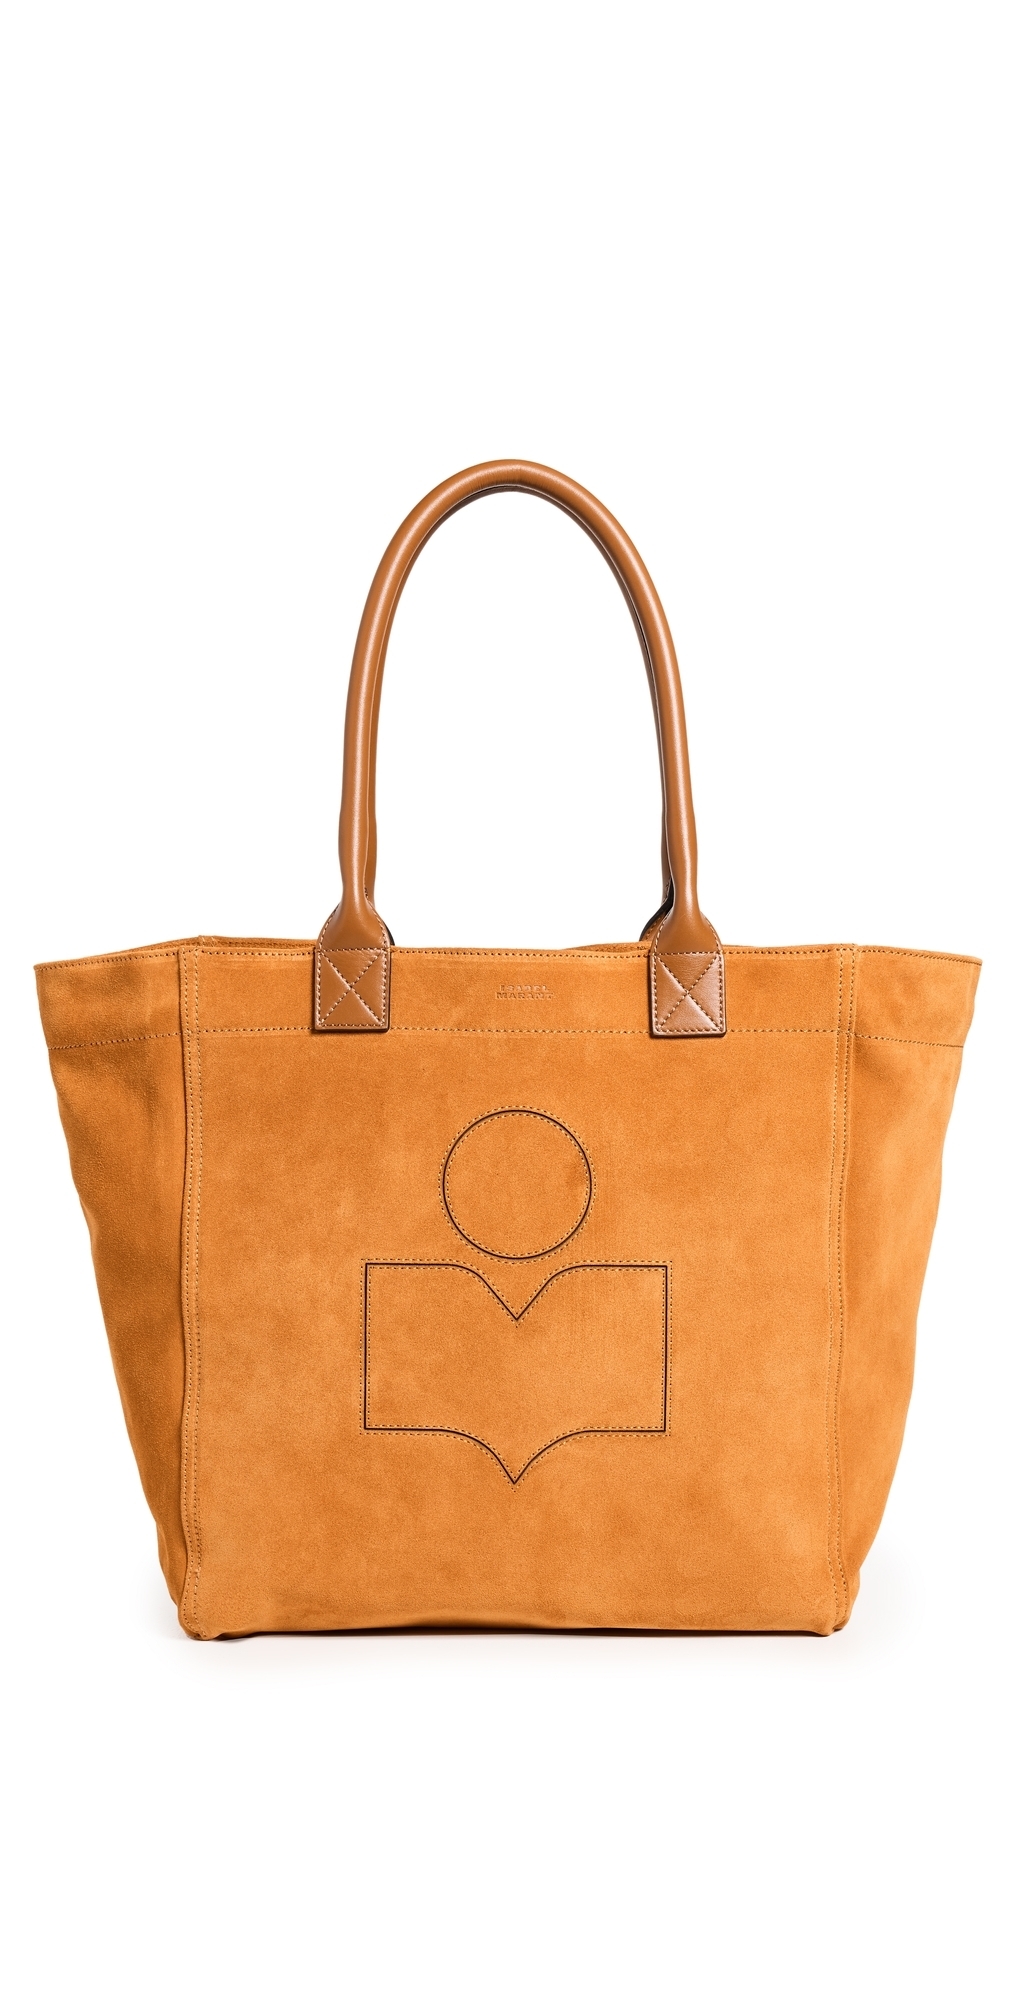 Isabel Marant Small Yenky Tote Sienna One Size